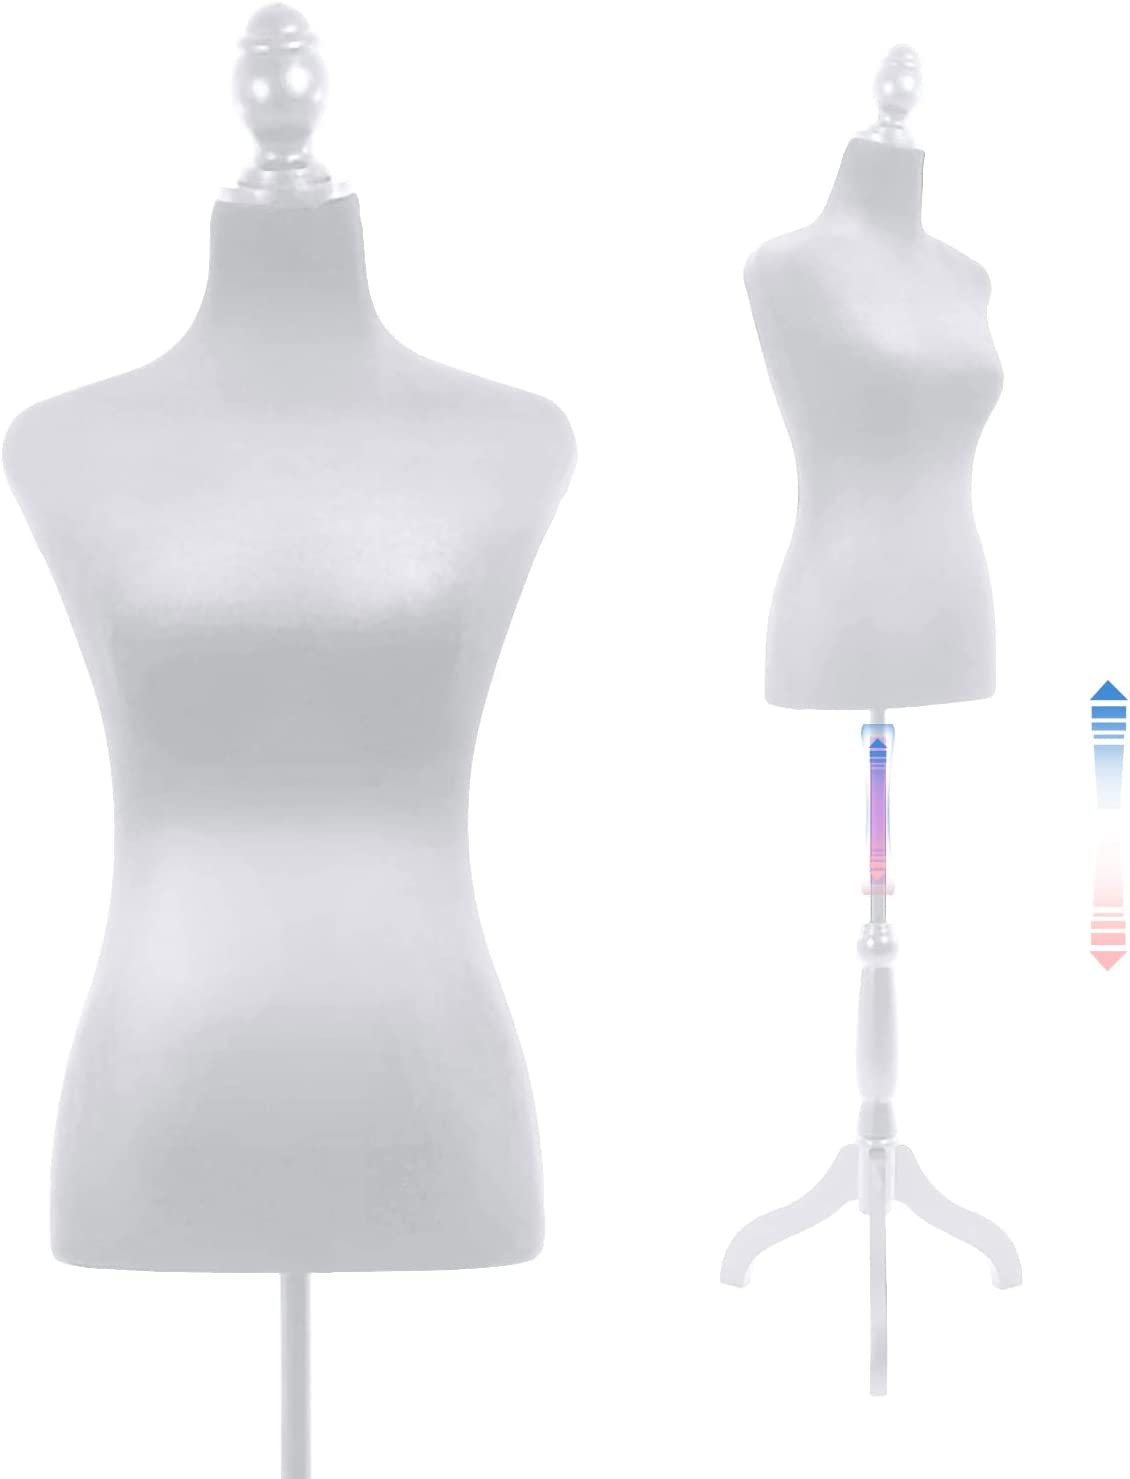 Mannequin Full Body Dress Form Sewing Dress Model Mannequin Stand  Adjustable Dress Mannequin Clothing Form 69 inch 73 inch Mannequin  Realistic Mannequin Display Head Arm Rotation Metal Base (69 Inch) 